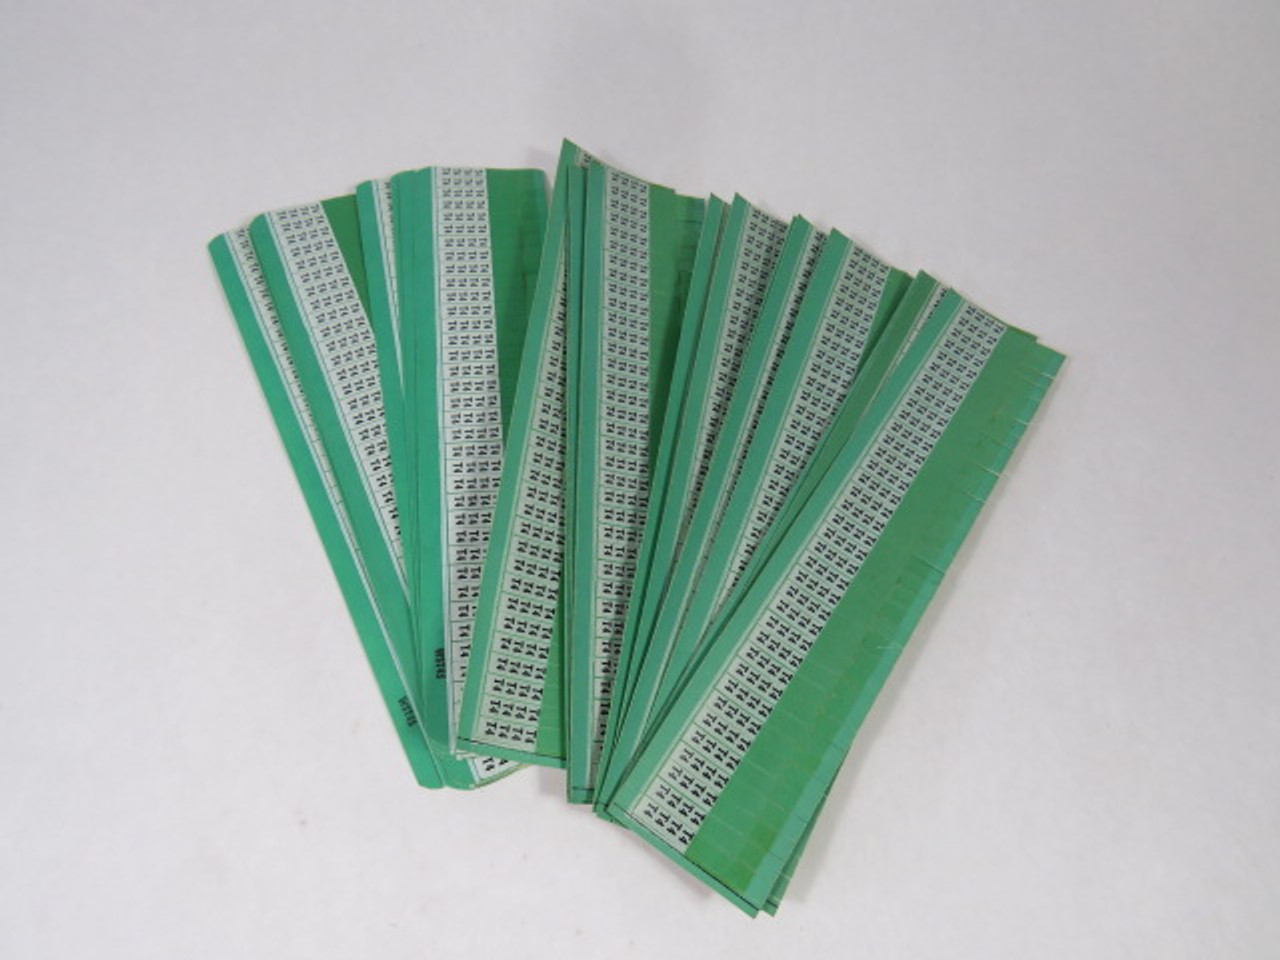 Thomas & Betts T4 Green E-Z-Code Wire Markers 25-Pack ! NEW !